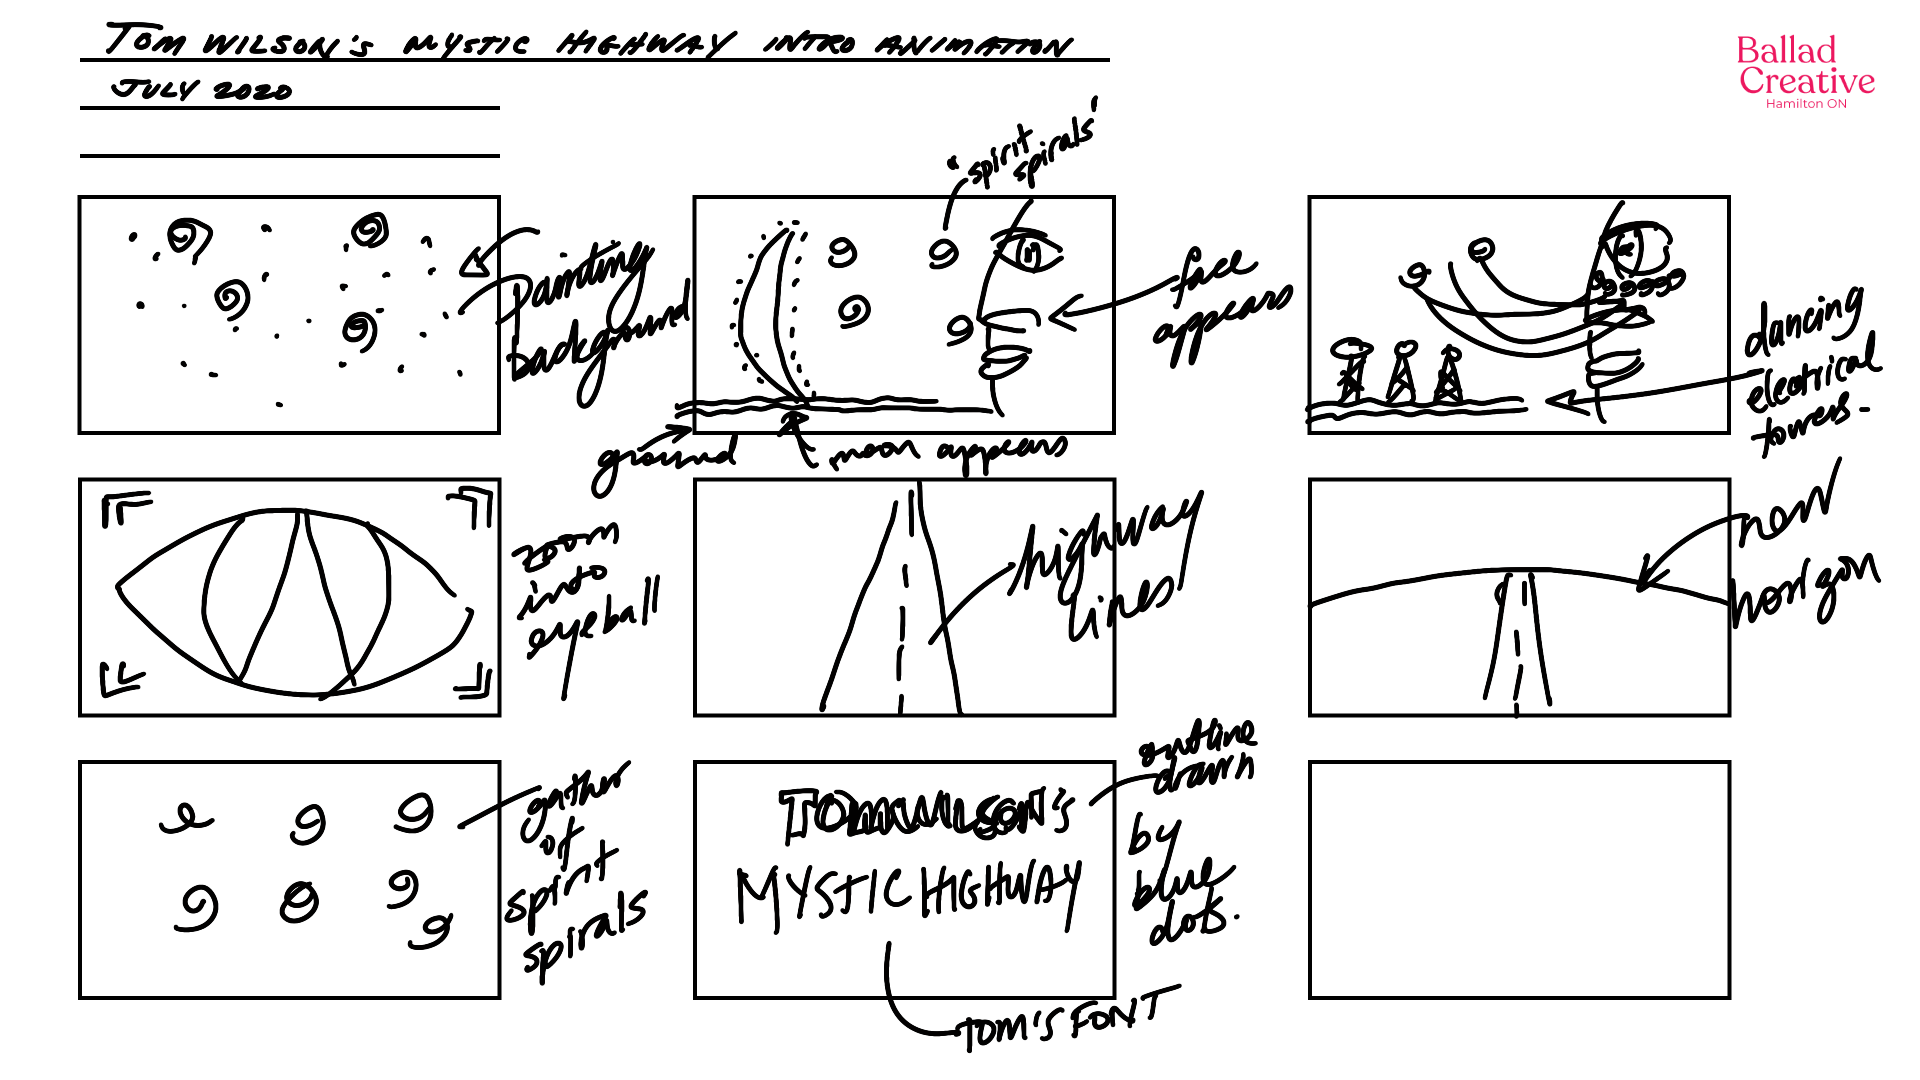 Storyboard to show how Tom's art would be animated.